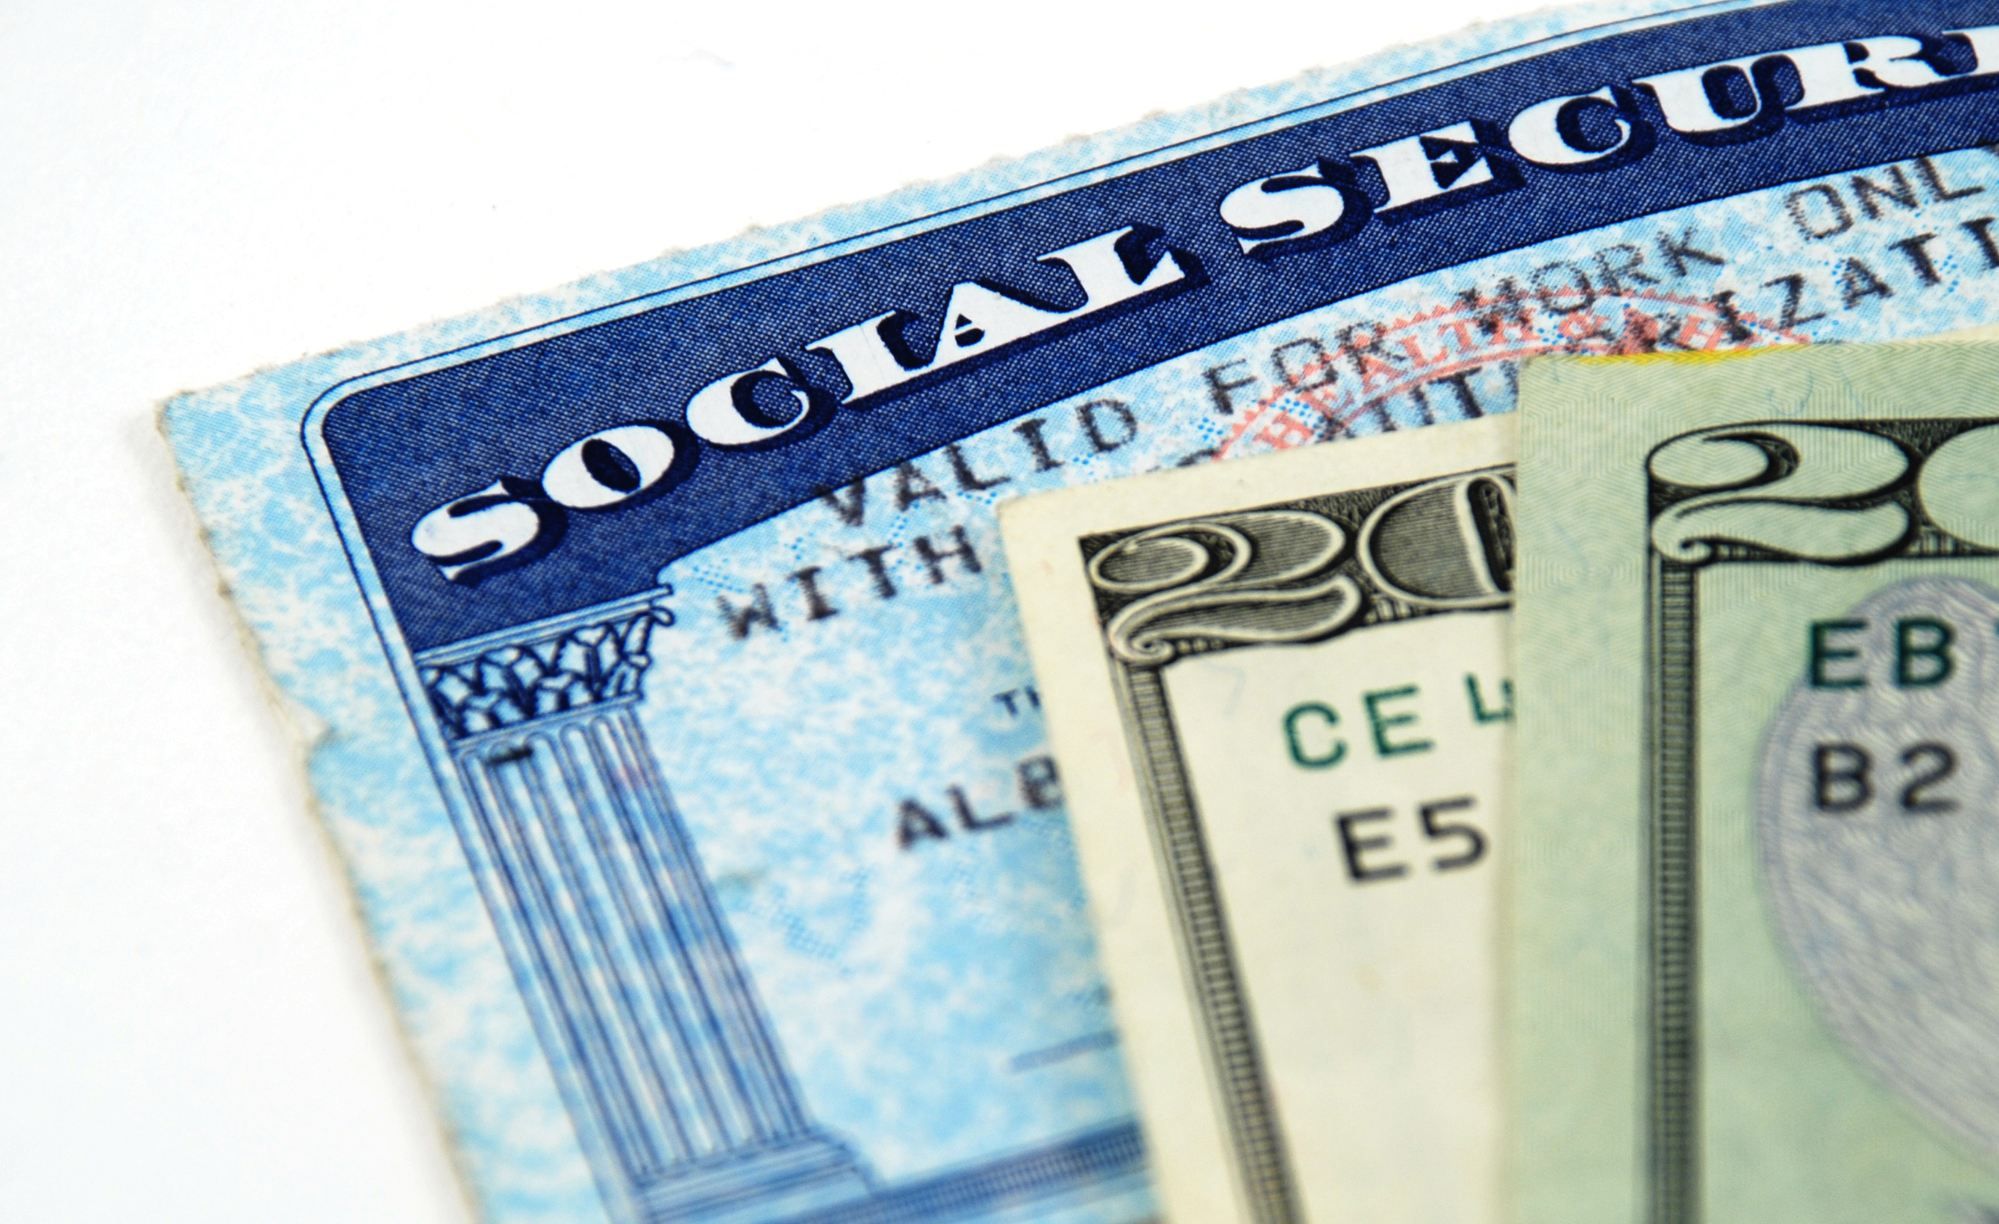 social security card and cash